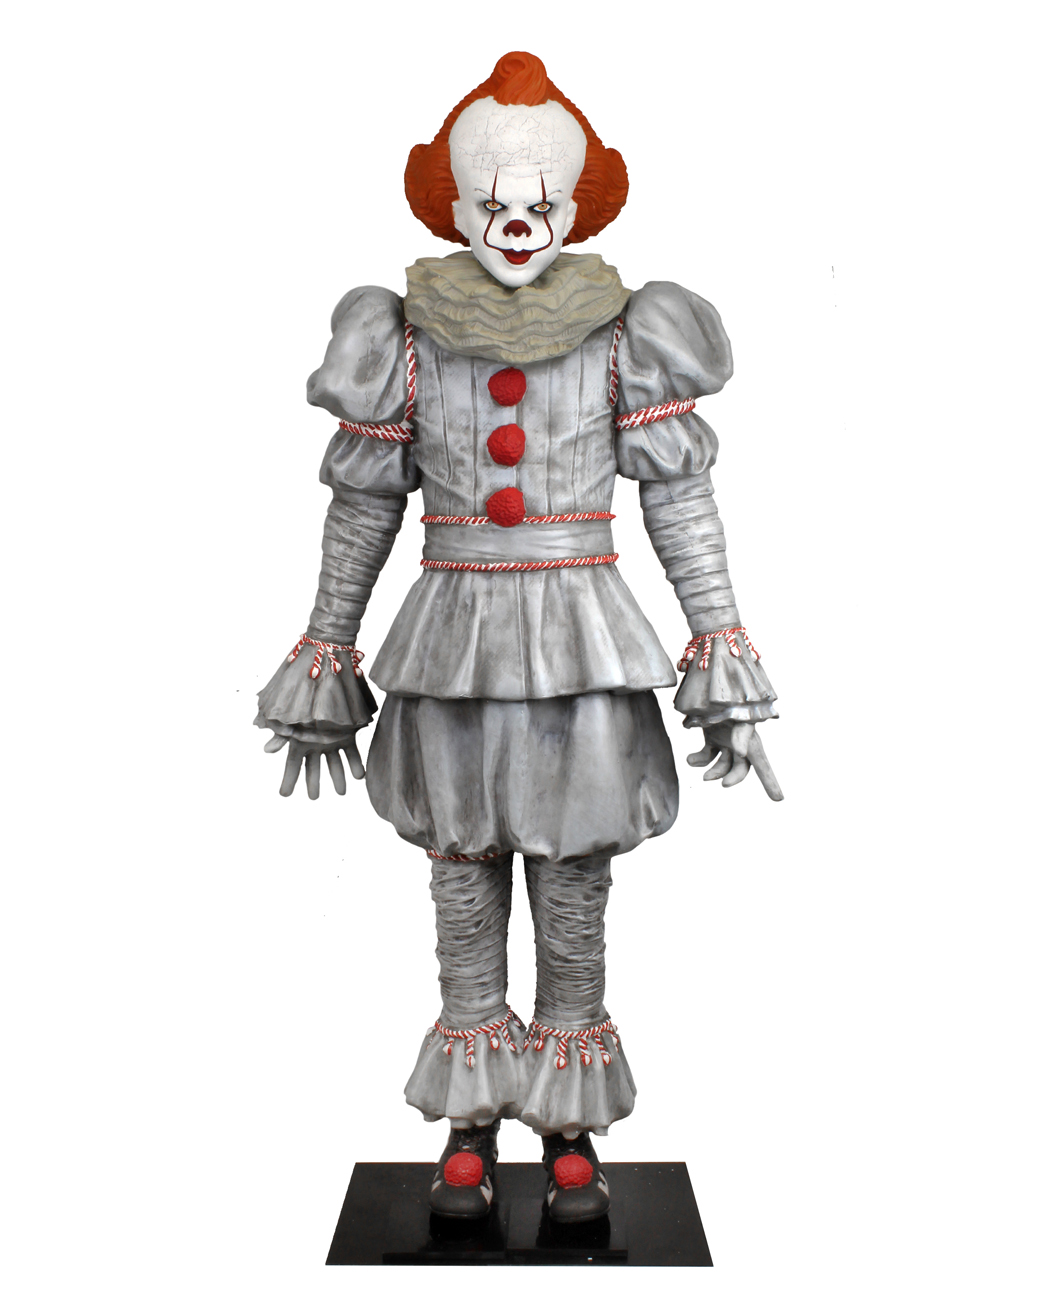 NECAOnline.com | Shipping This Week - IT Chapter 2 Life-Size Pennywise, and Restocks of Ultimate Jason from Friday the 13th(2009) and King of the Monsters(2019) 12